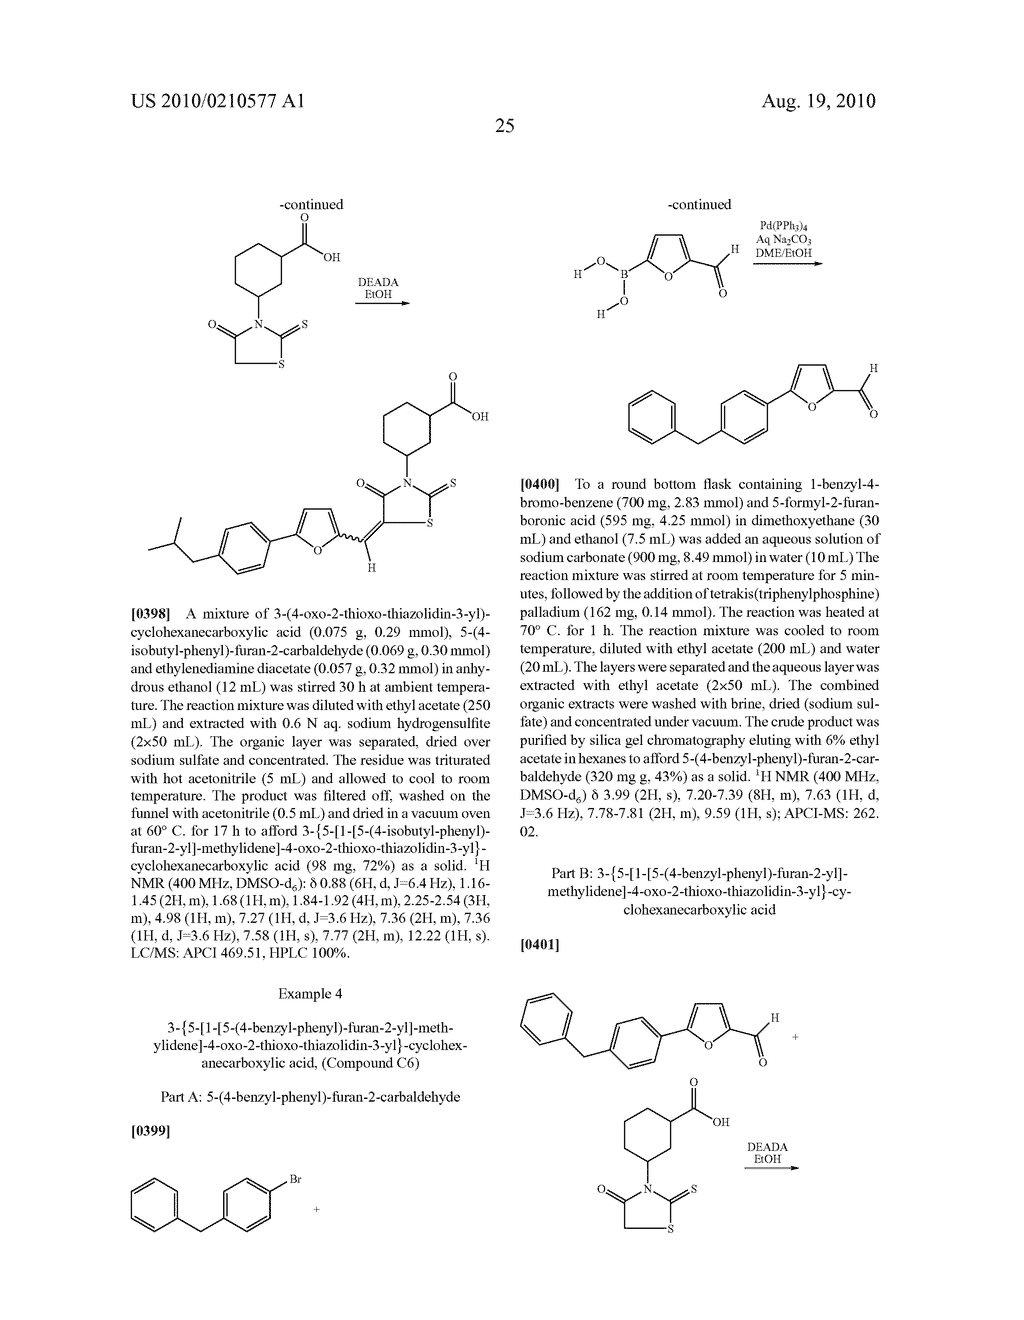 CYCLIC CARBOXYLIC ACID RHODANINE DERIVATIVES FOR THE TREATMENT AND PREVENTION OF TUBERCULOSIS - diagram, schematic, and image 35